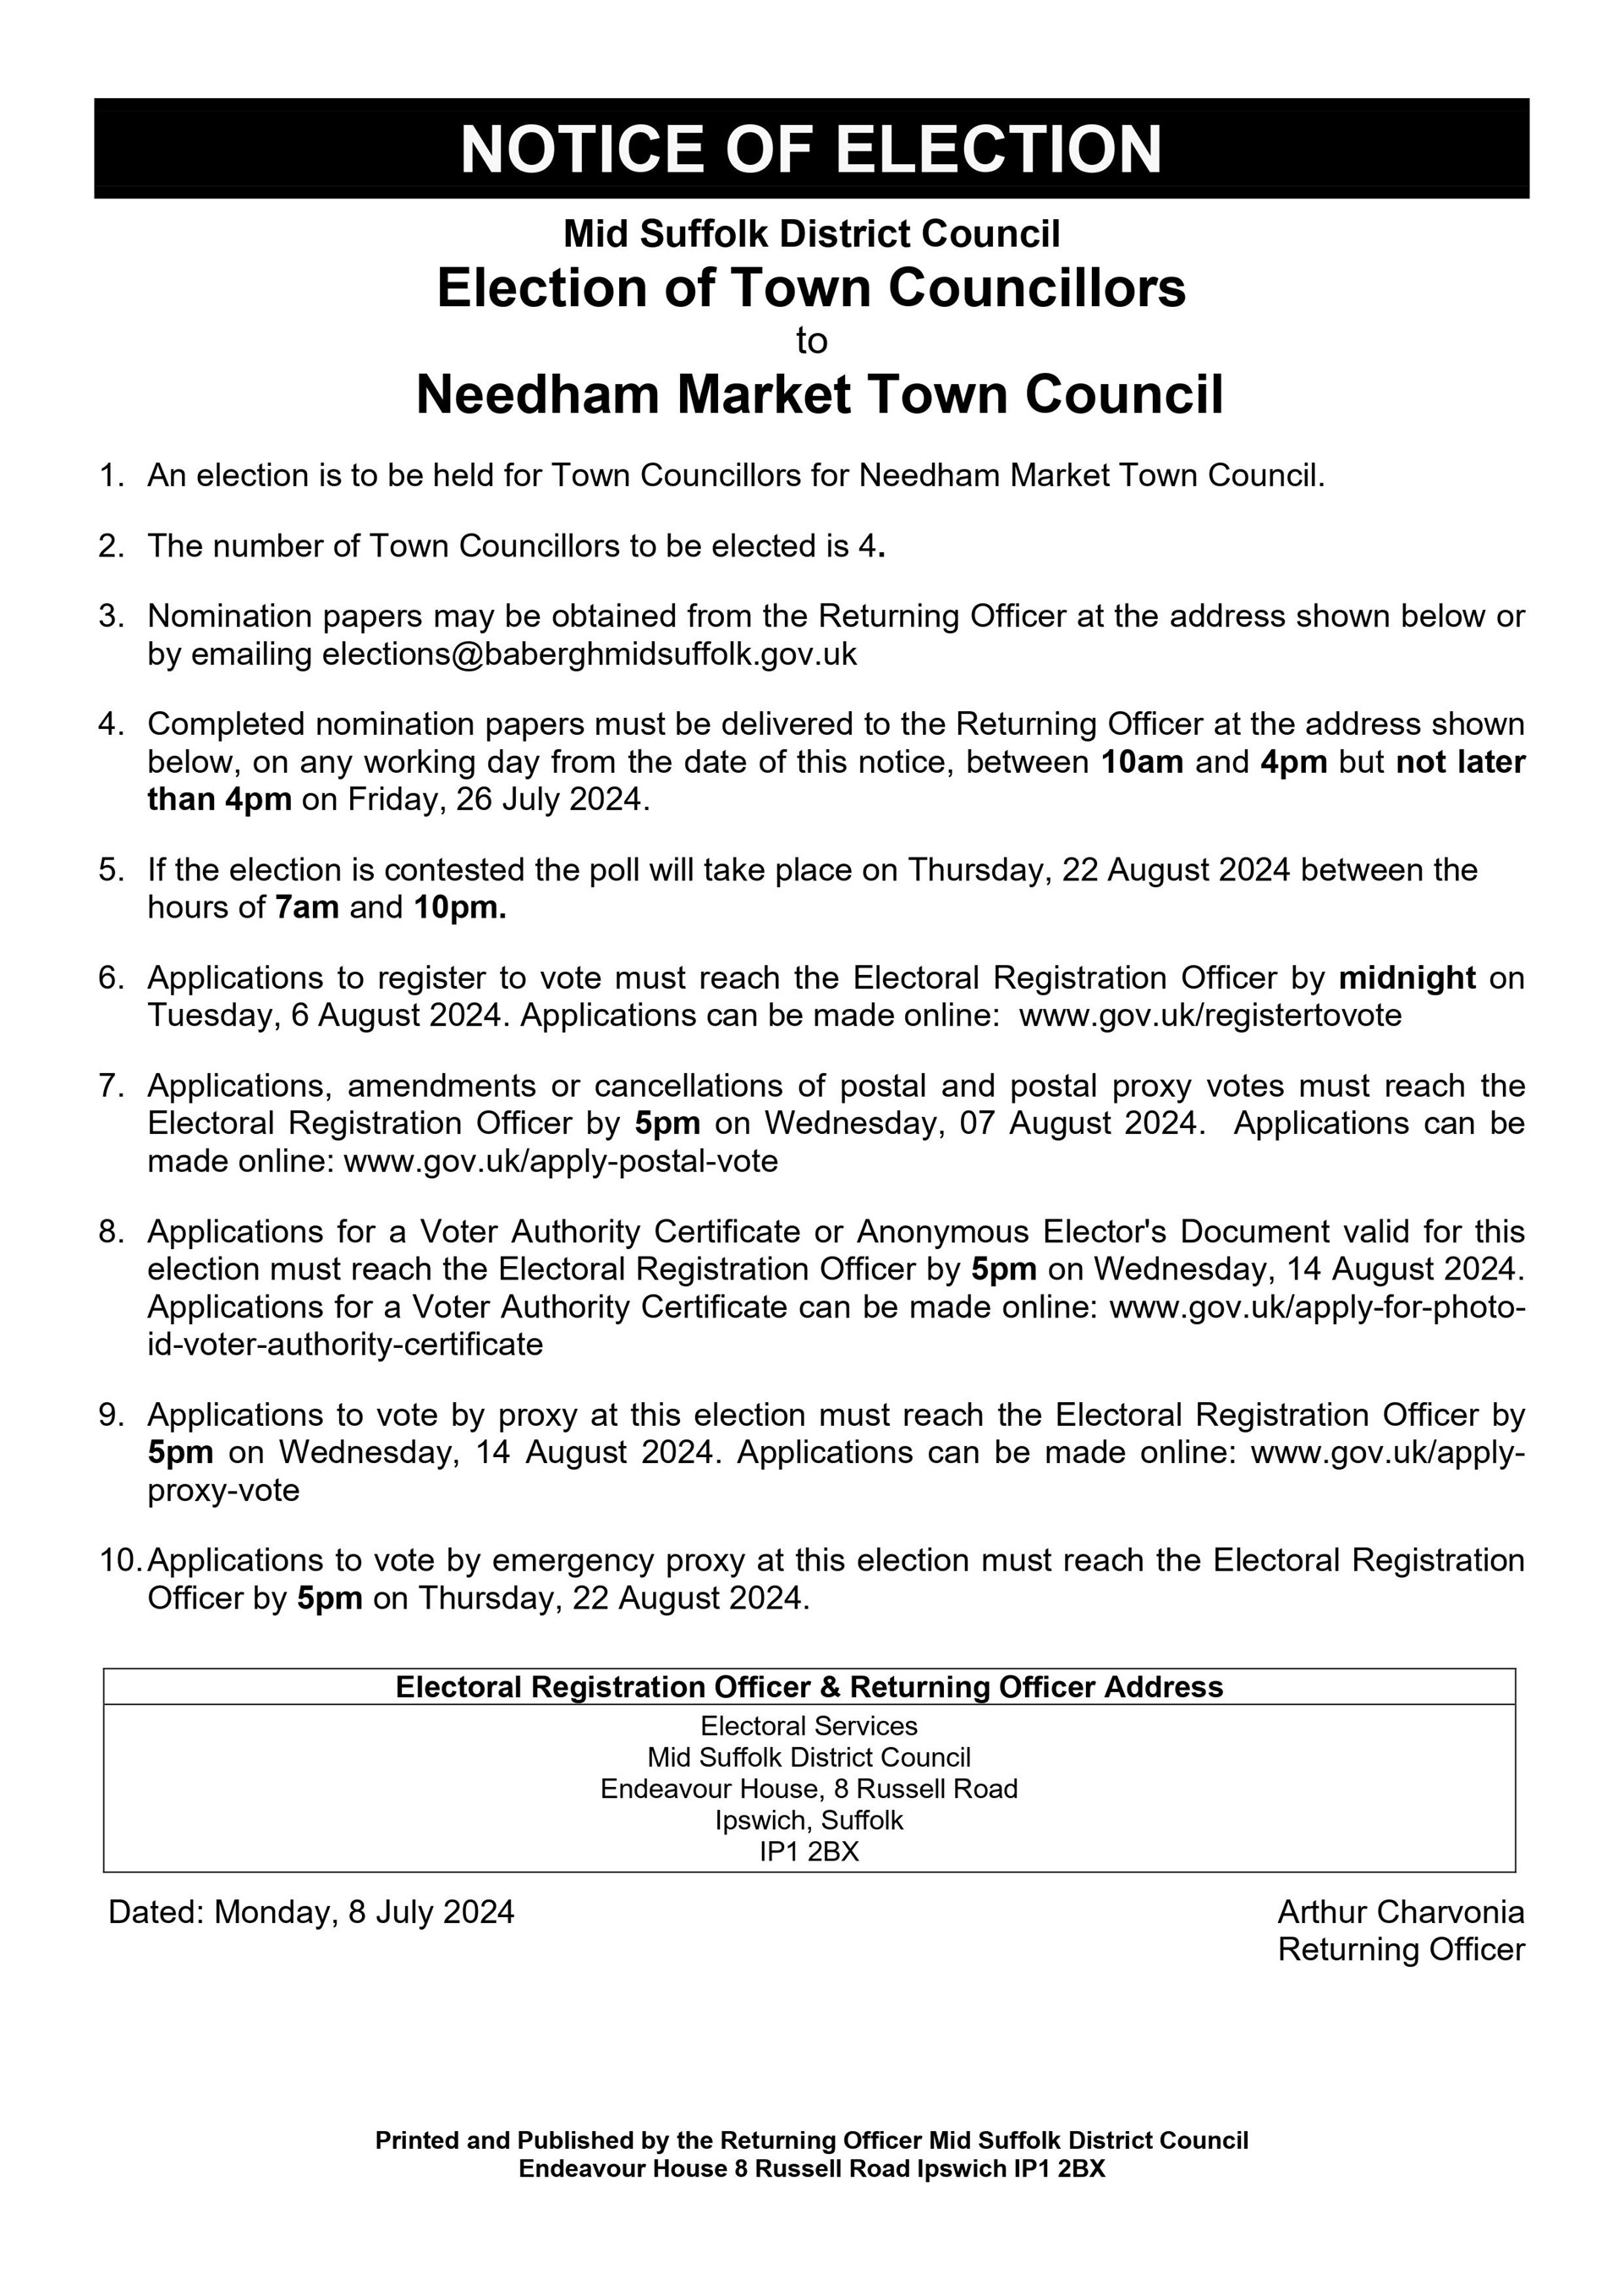 Needham Market Town Council Home